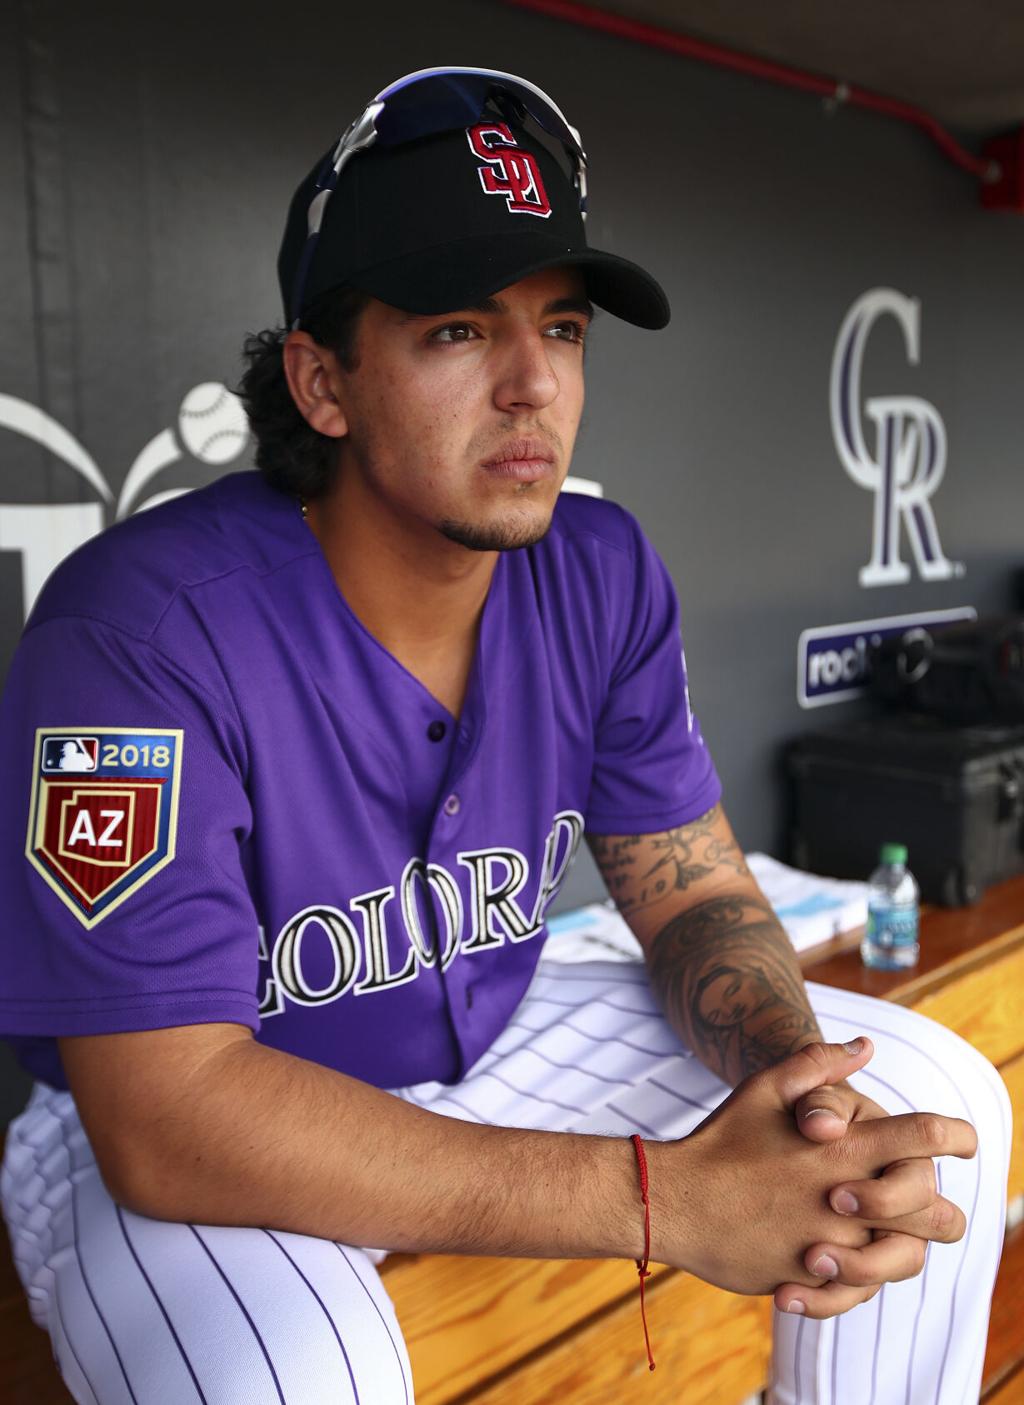 Colorado Rockies Roster In 2013: State Of The Union